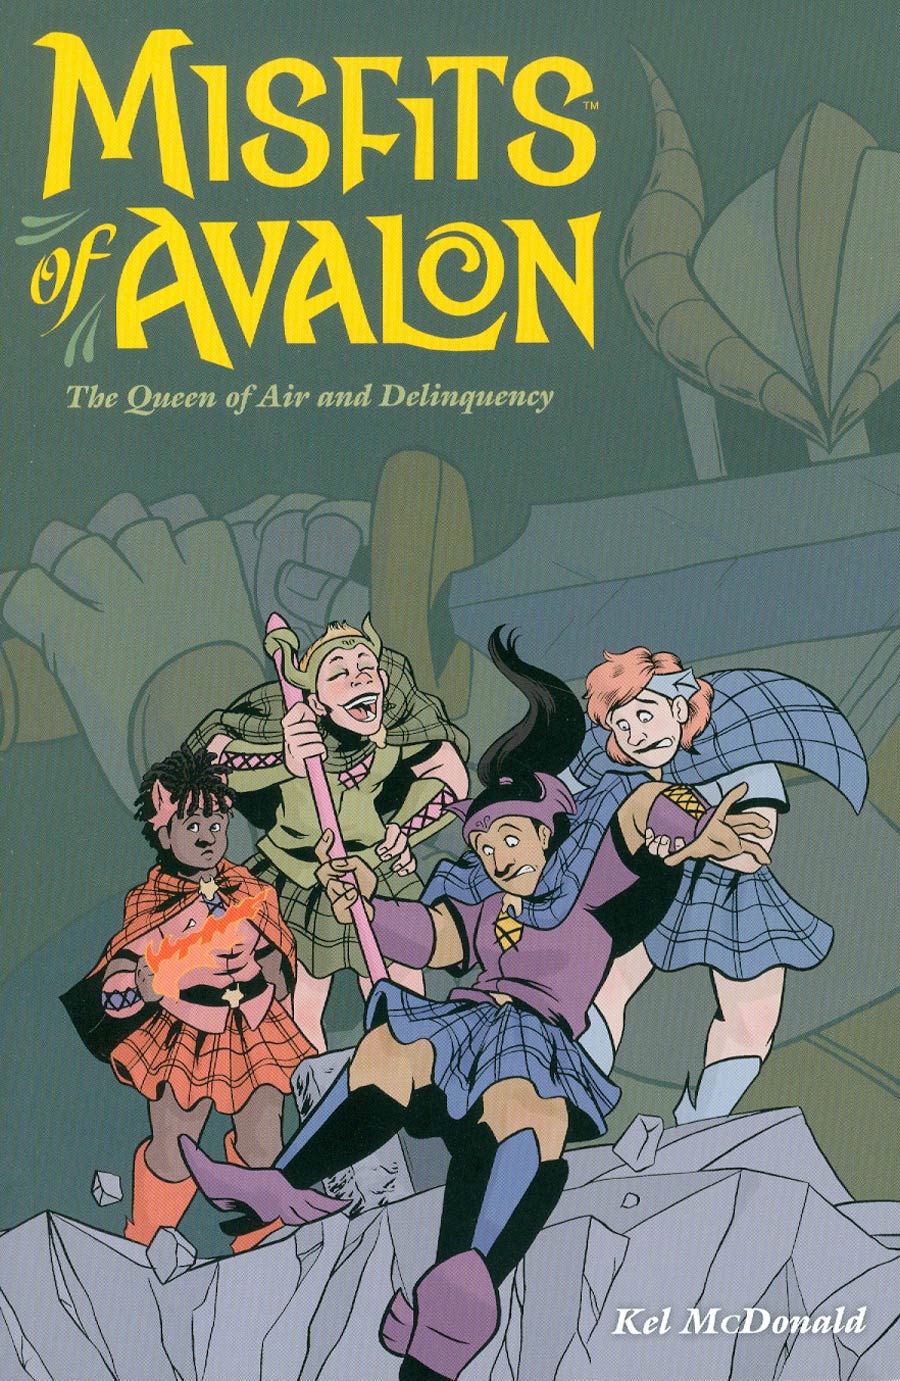 Misfits Of Avalon Vol 1 Queen Of Air And Delinquency TP